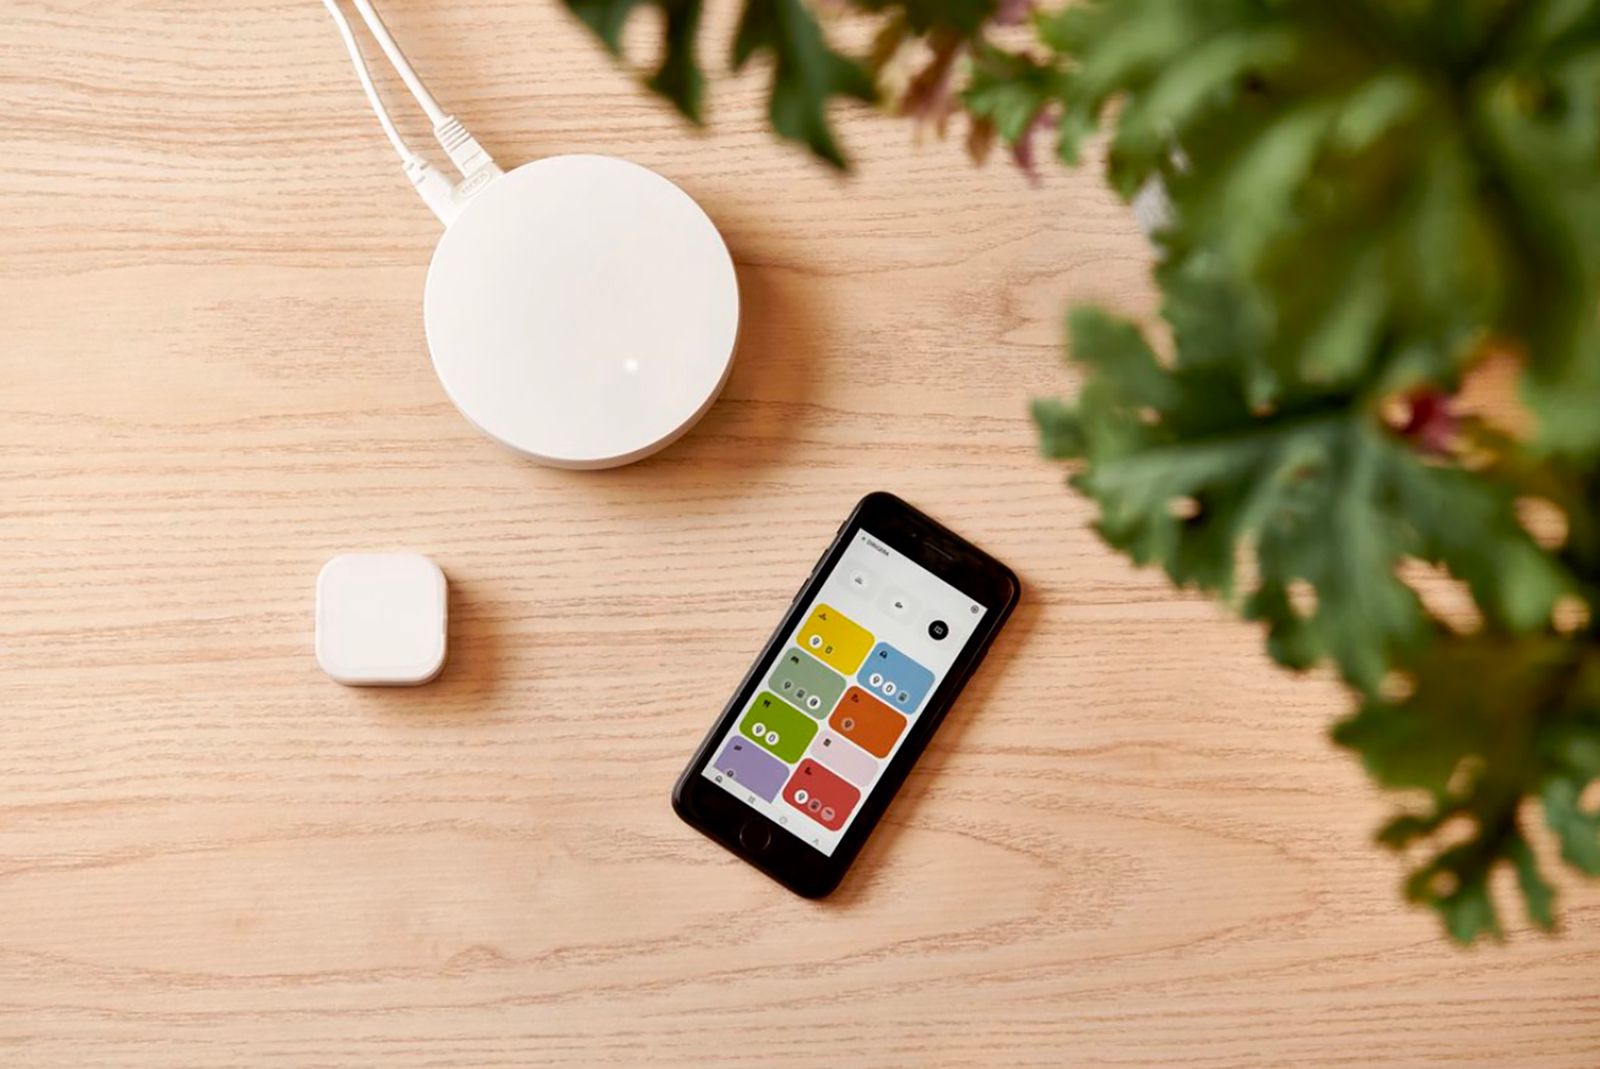 Ikea's new smart home hub comes with Matter support and a new 'Home' app photo 1